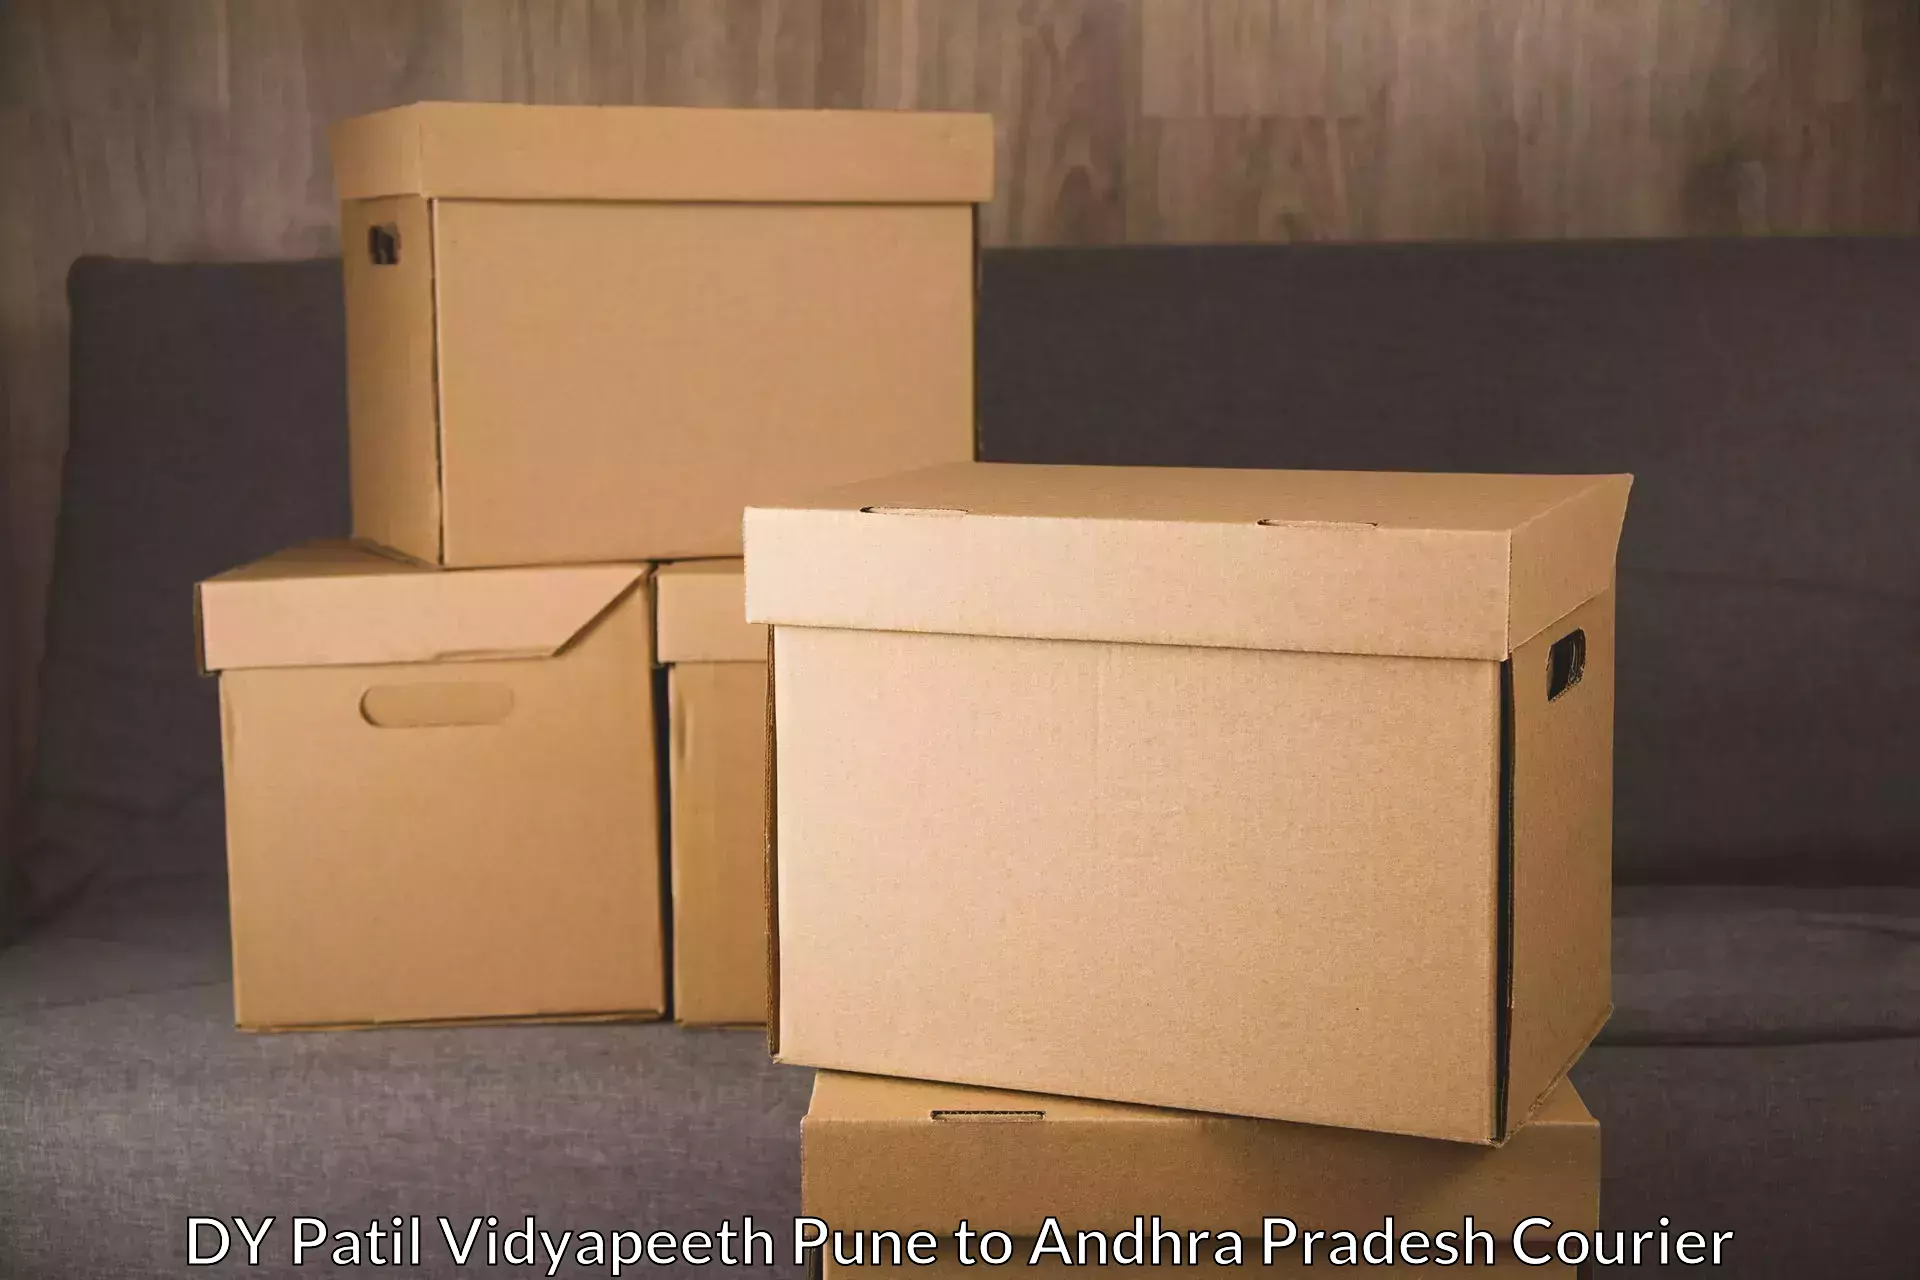 Same-day delivery options DY Patil Vidyapeeth Pune to Akividu